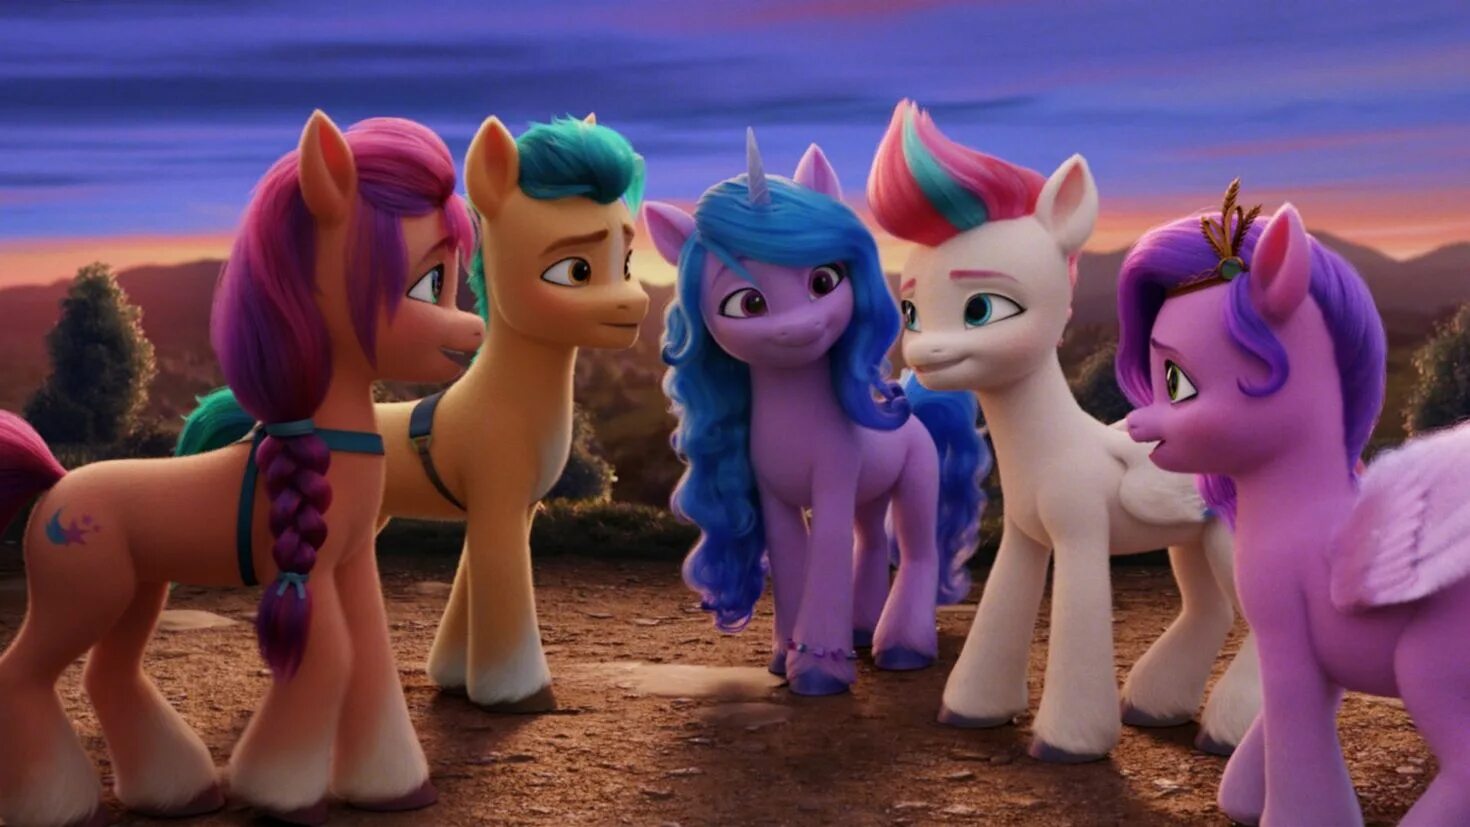 My little Pony новое поколение 2021. МЛП g5 Санни. Санни старскаут. My new buyings